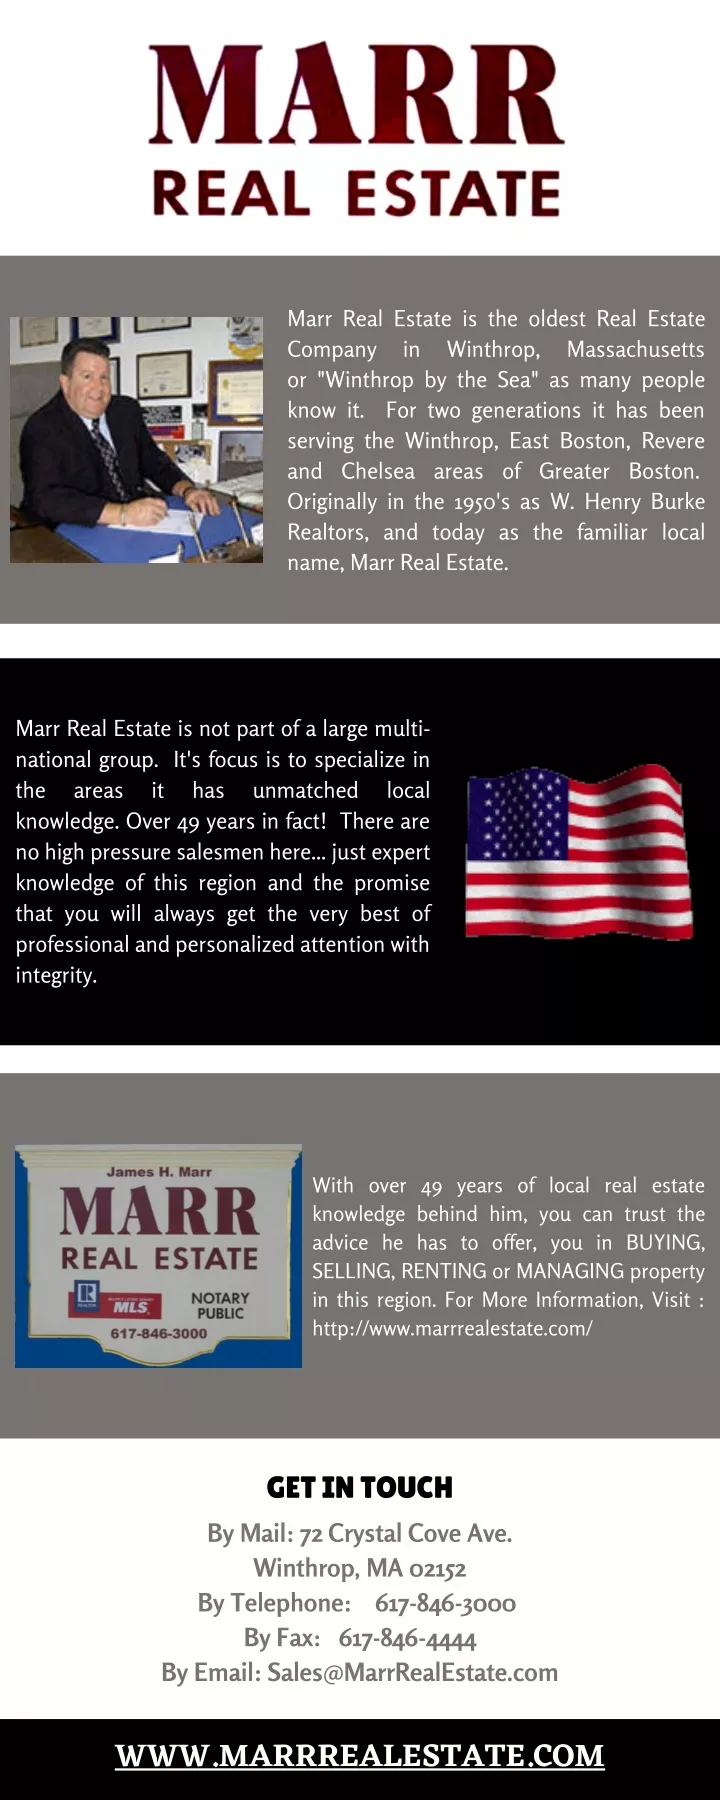 marr real estate is the oldest real estate